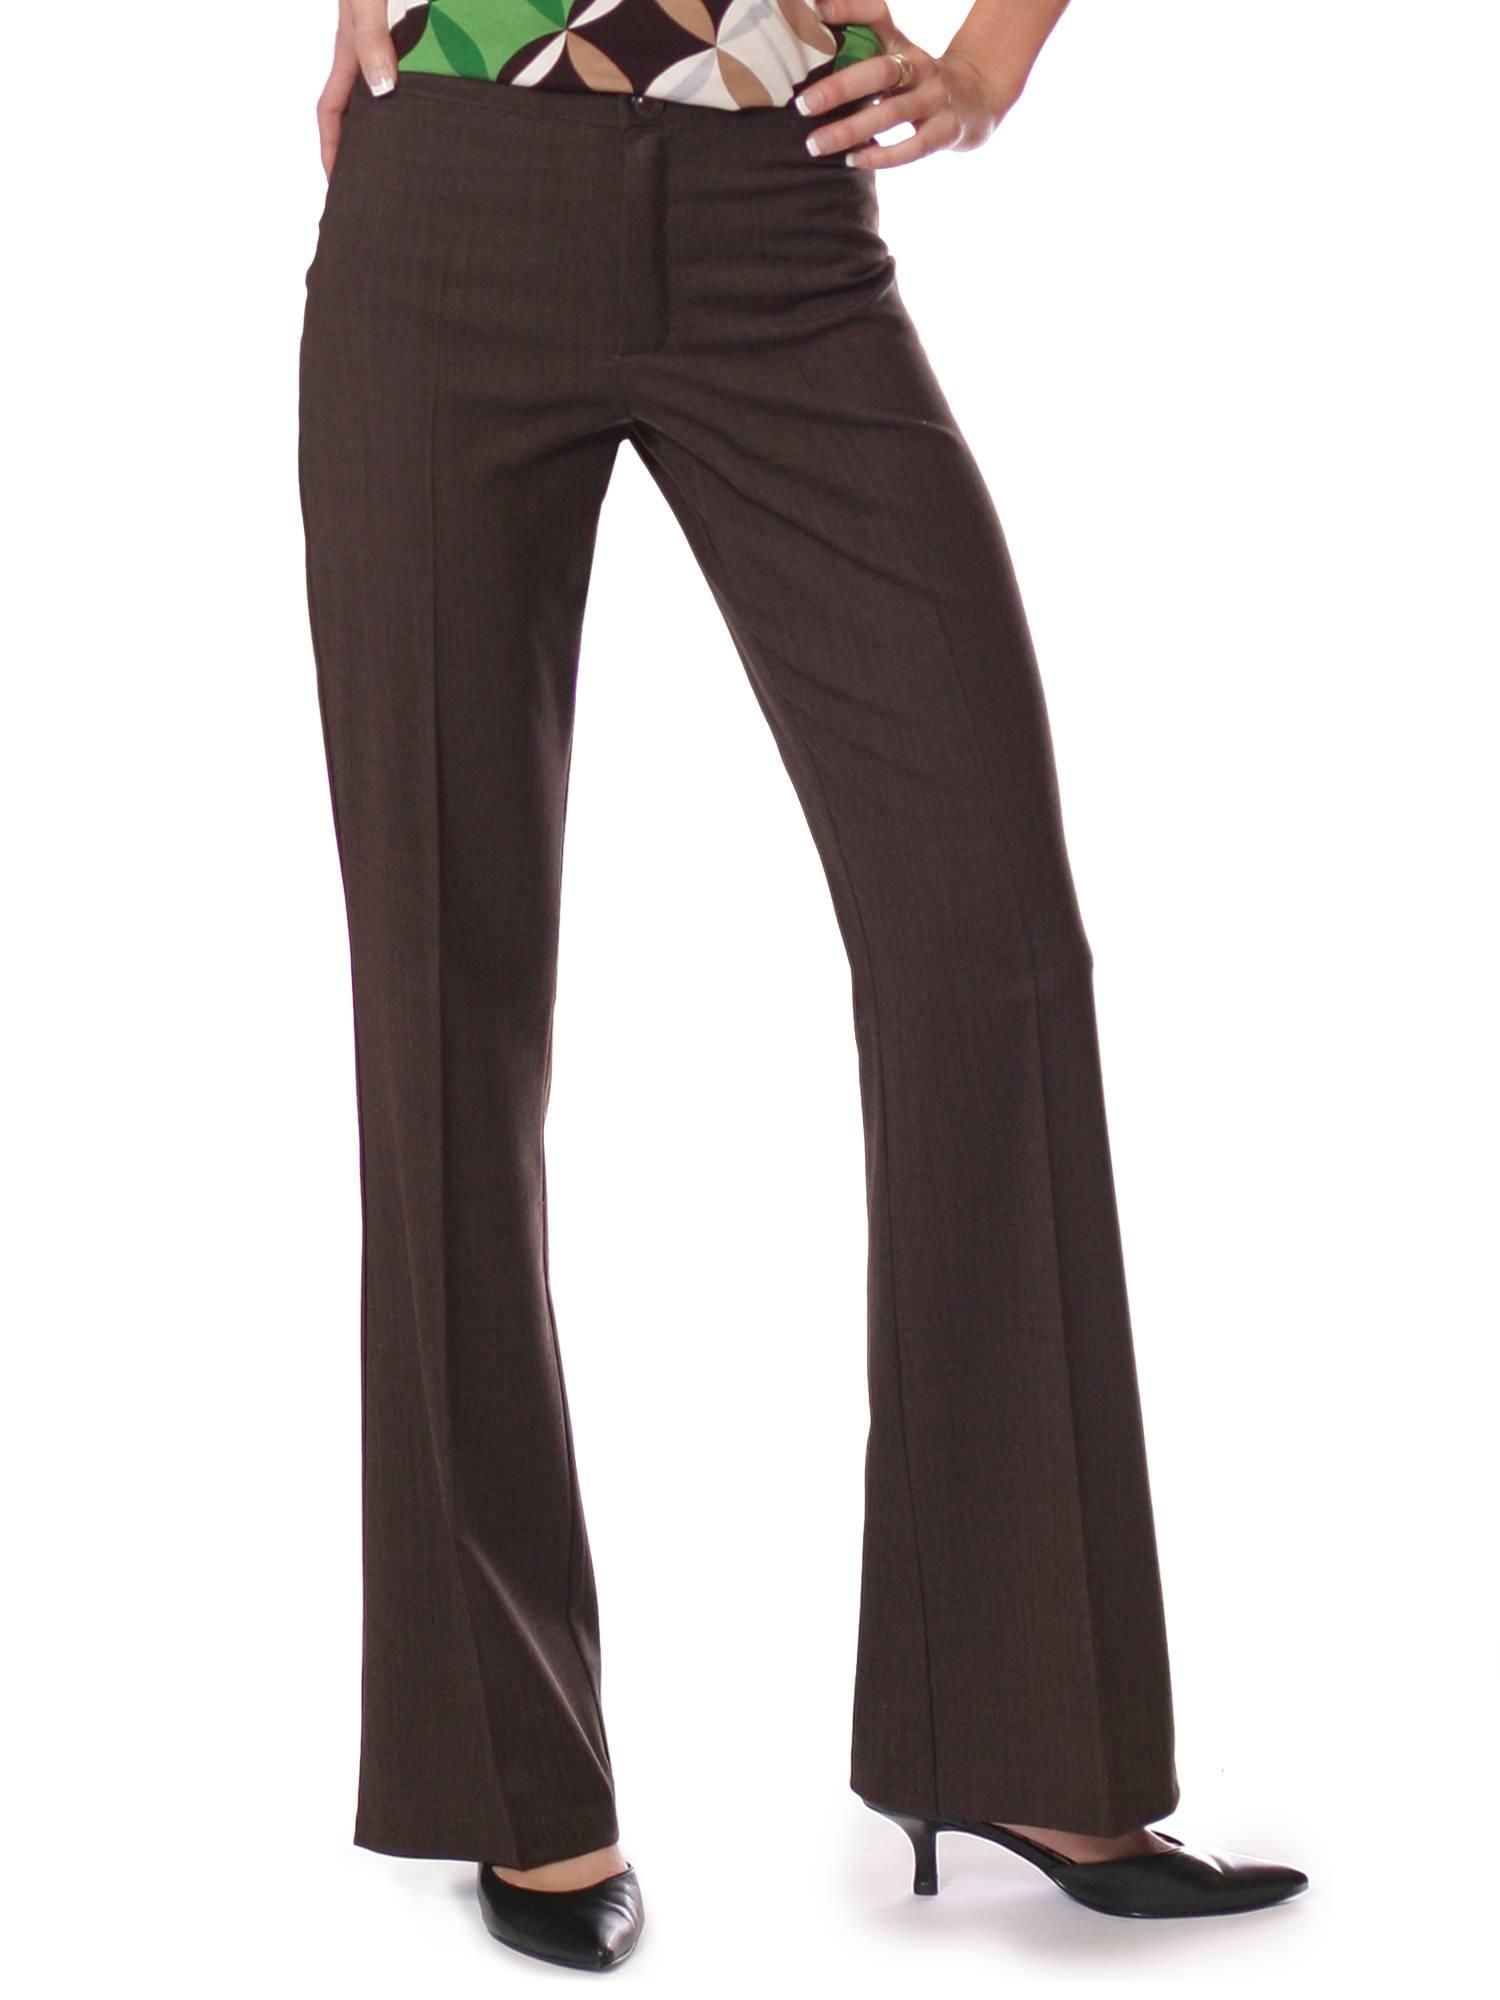 Jalie 2909 - Classic Trousers Pattern for Women